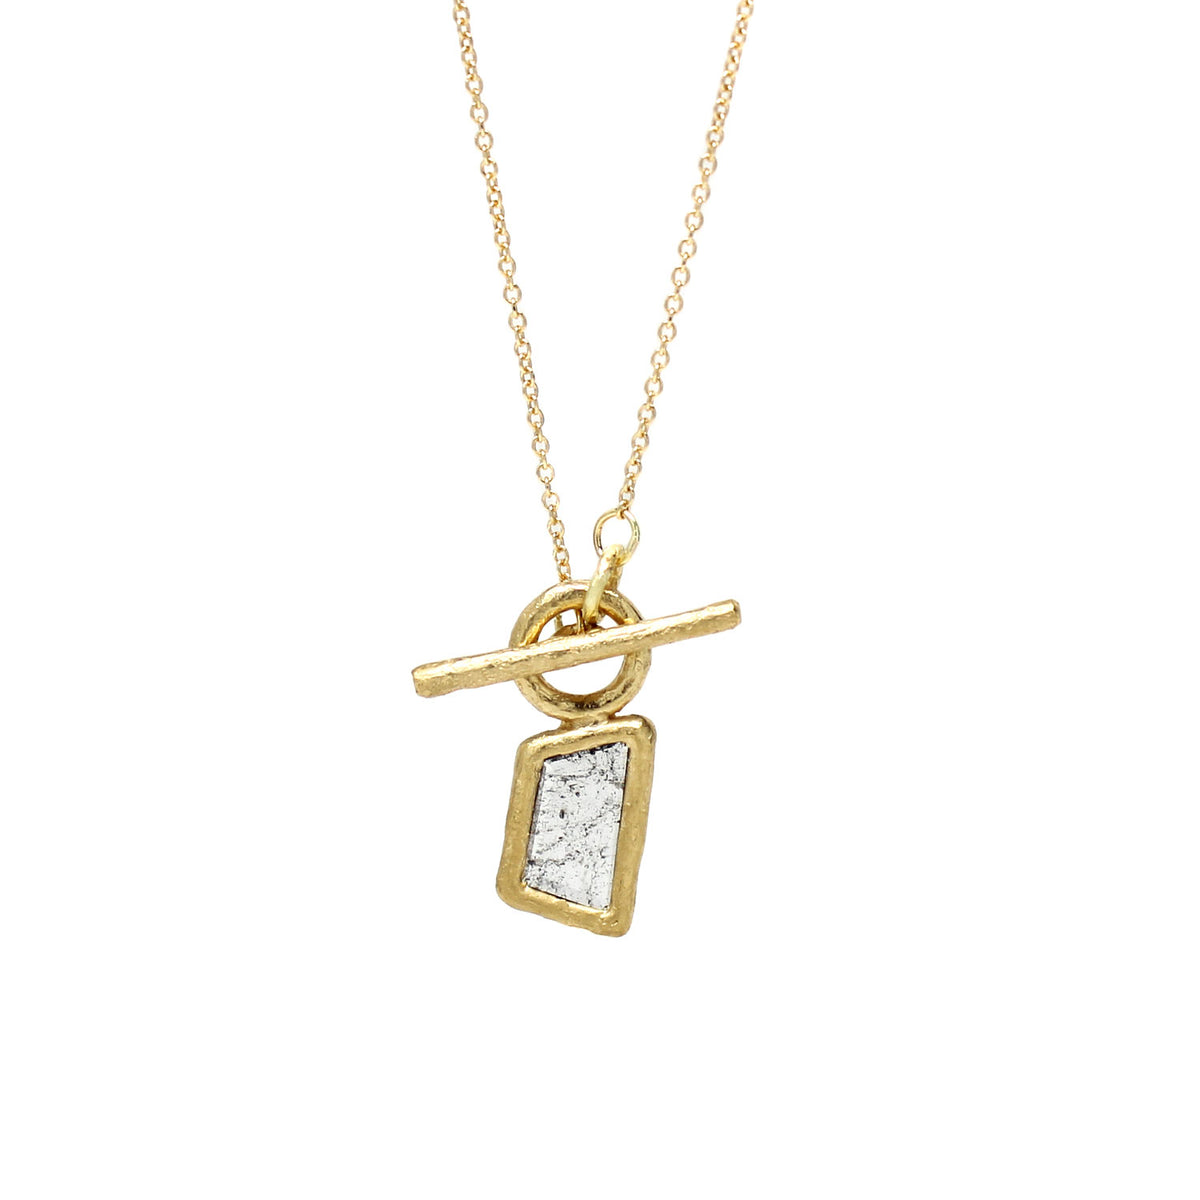 One-of-a-Kind Diamond Slab Necklace with Toggle